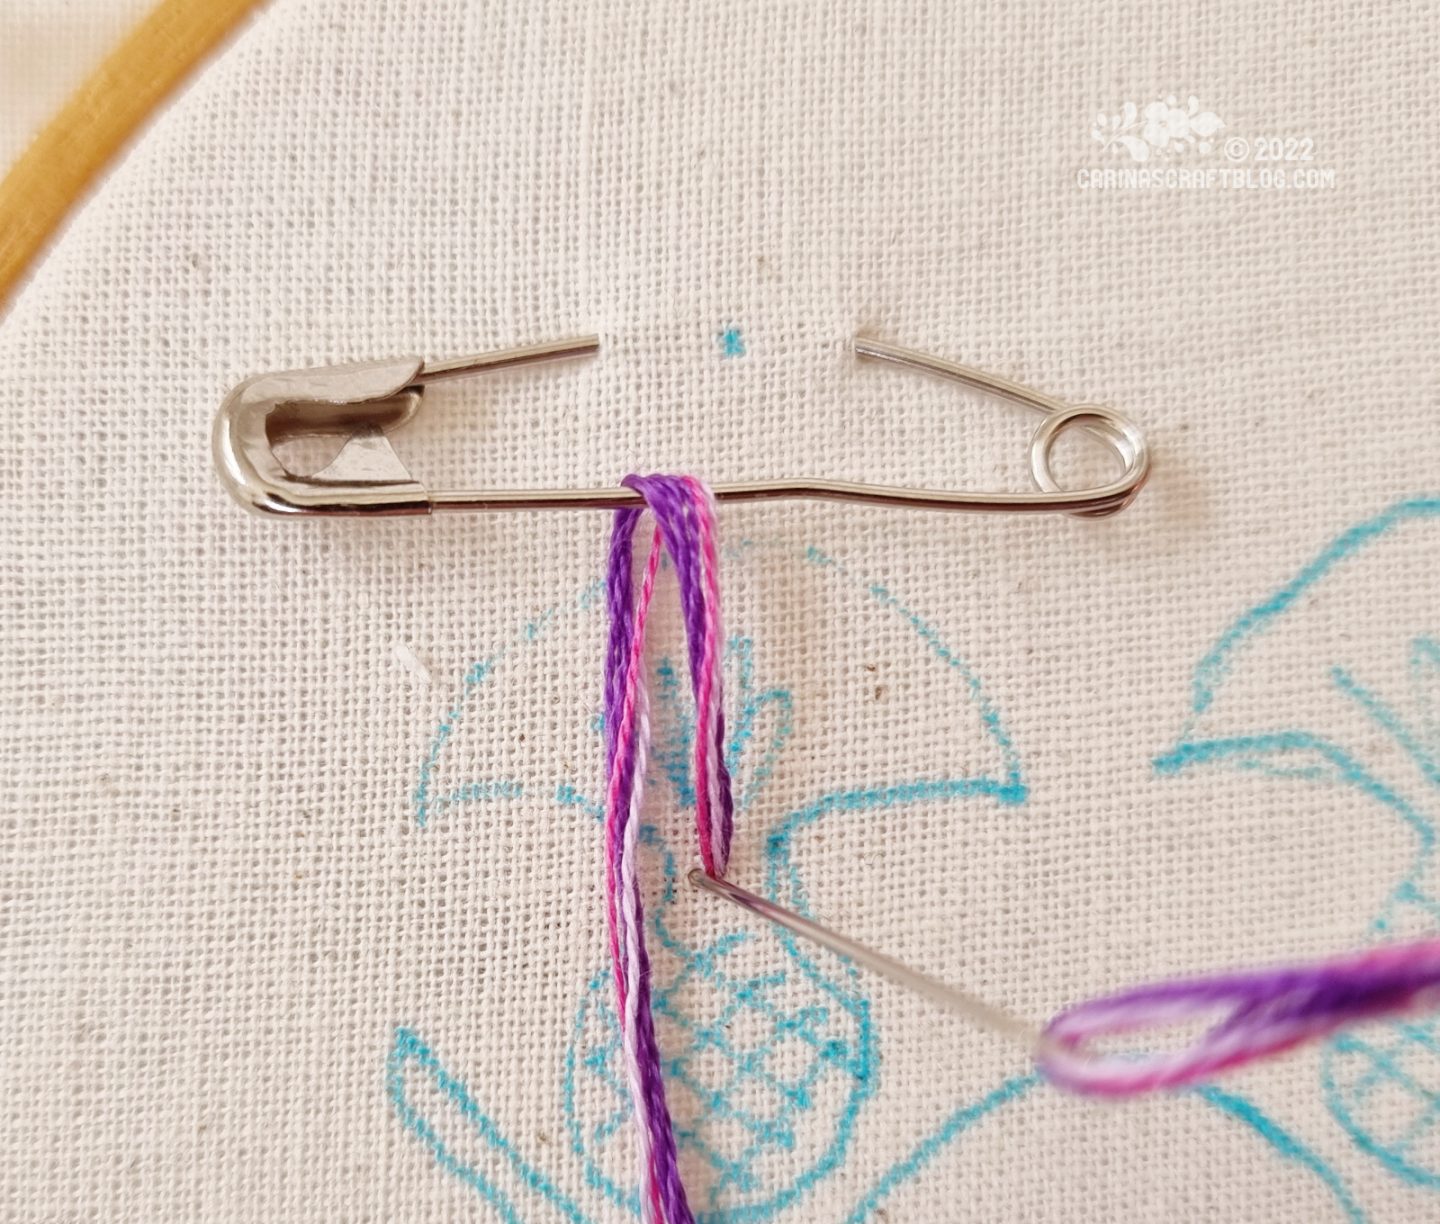 Closeup of a safety pin attached to white fabric. Embroidery thread in purple colours has been looped through the safety pin.